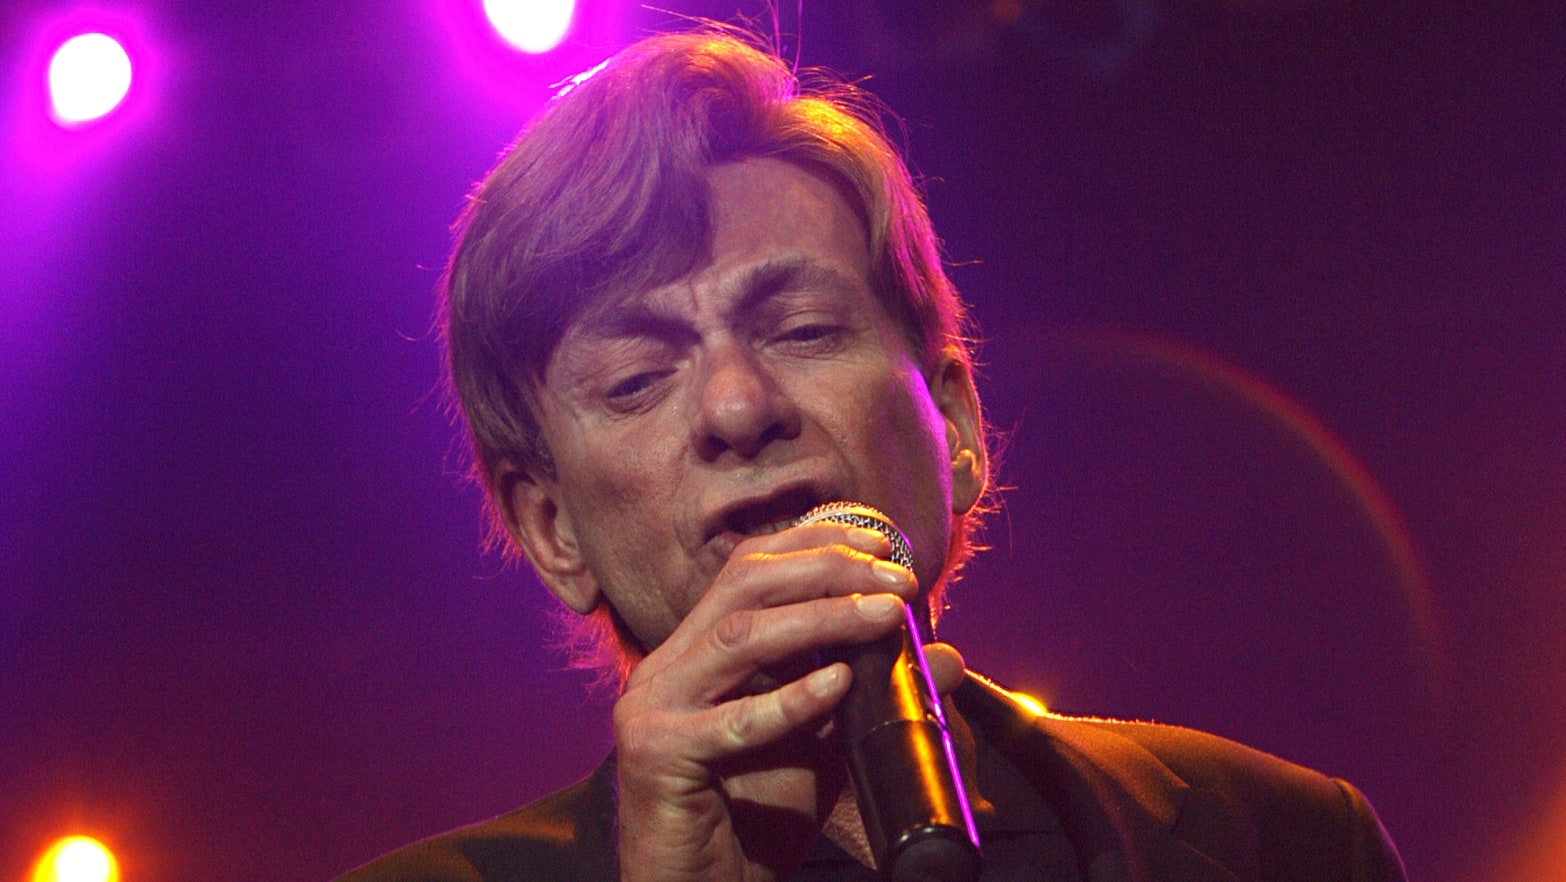 Bobby Caldwell performs in a neon-lit room